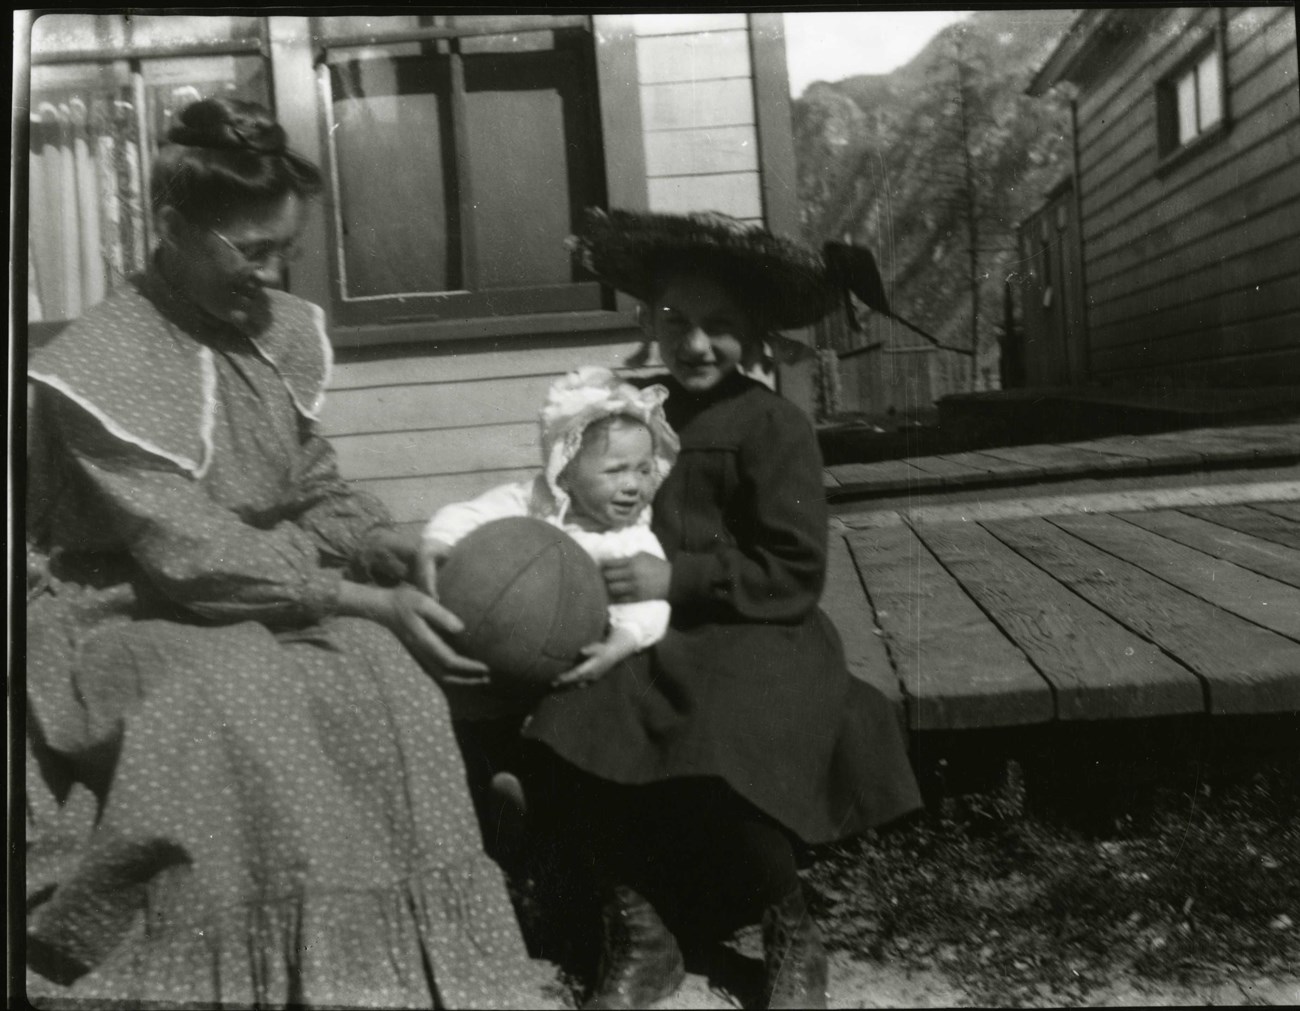 Black and white photo of two women sitting on a wooden platform playing with a baby who is holding a basketball.